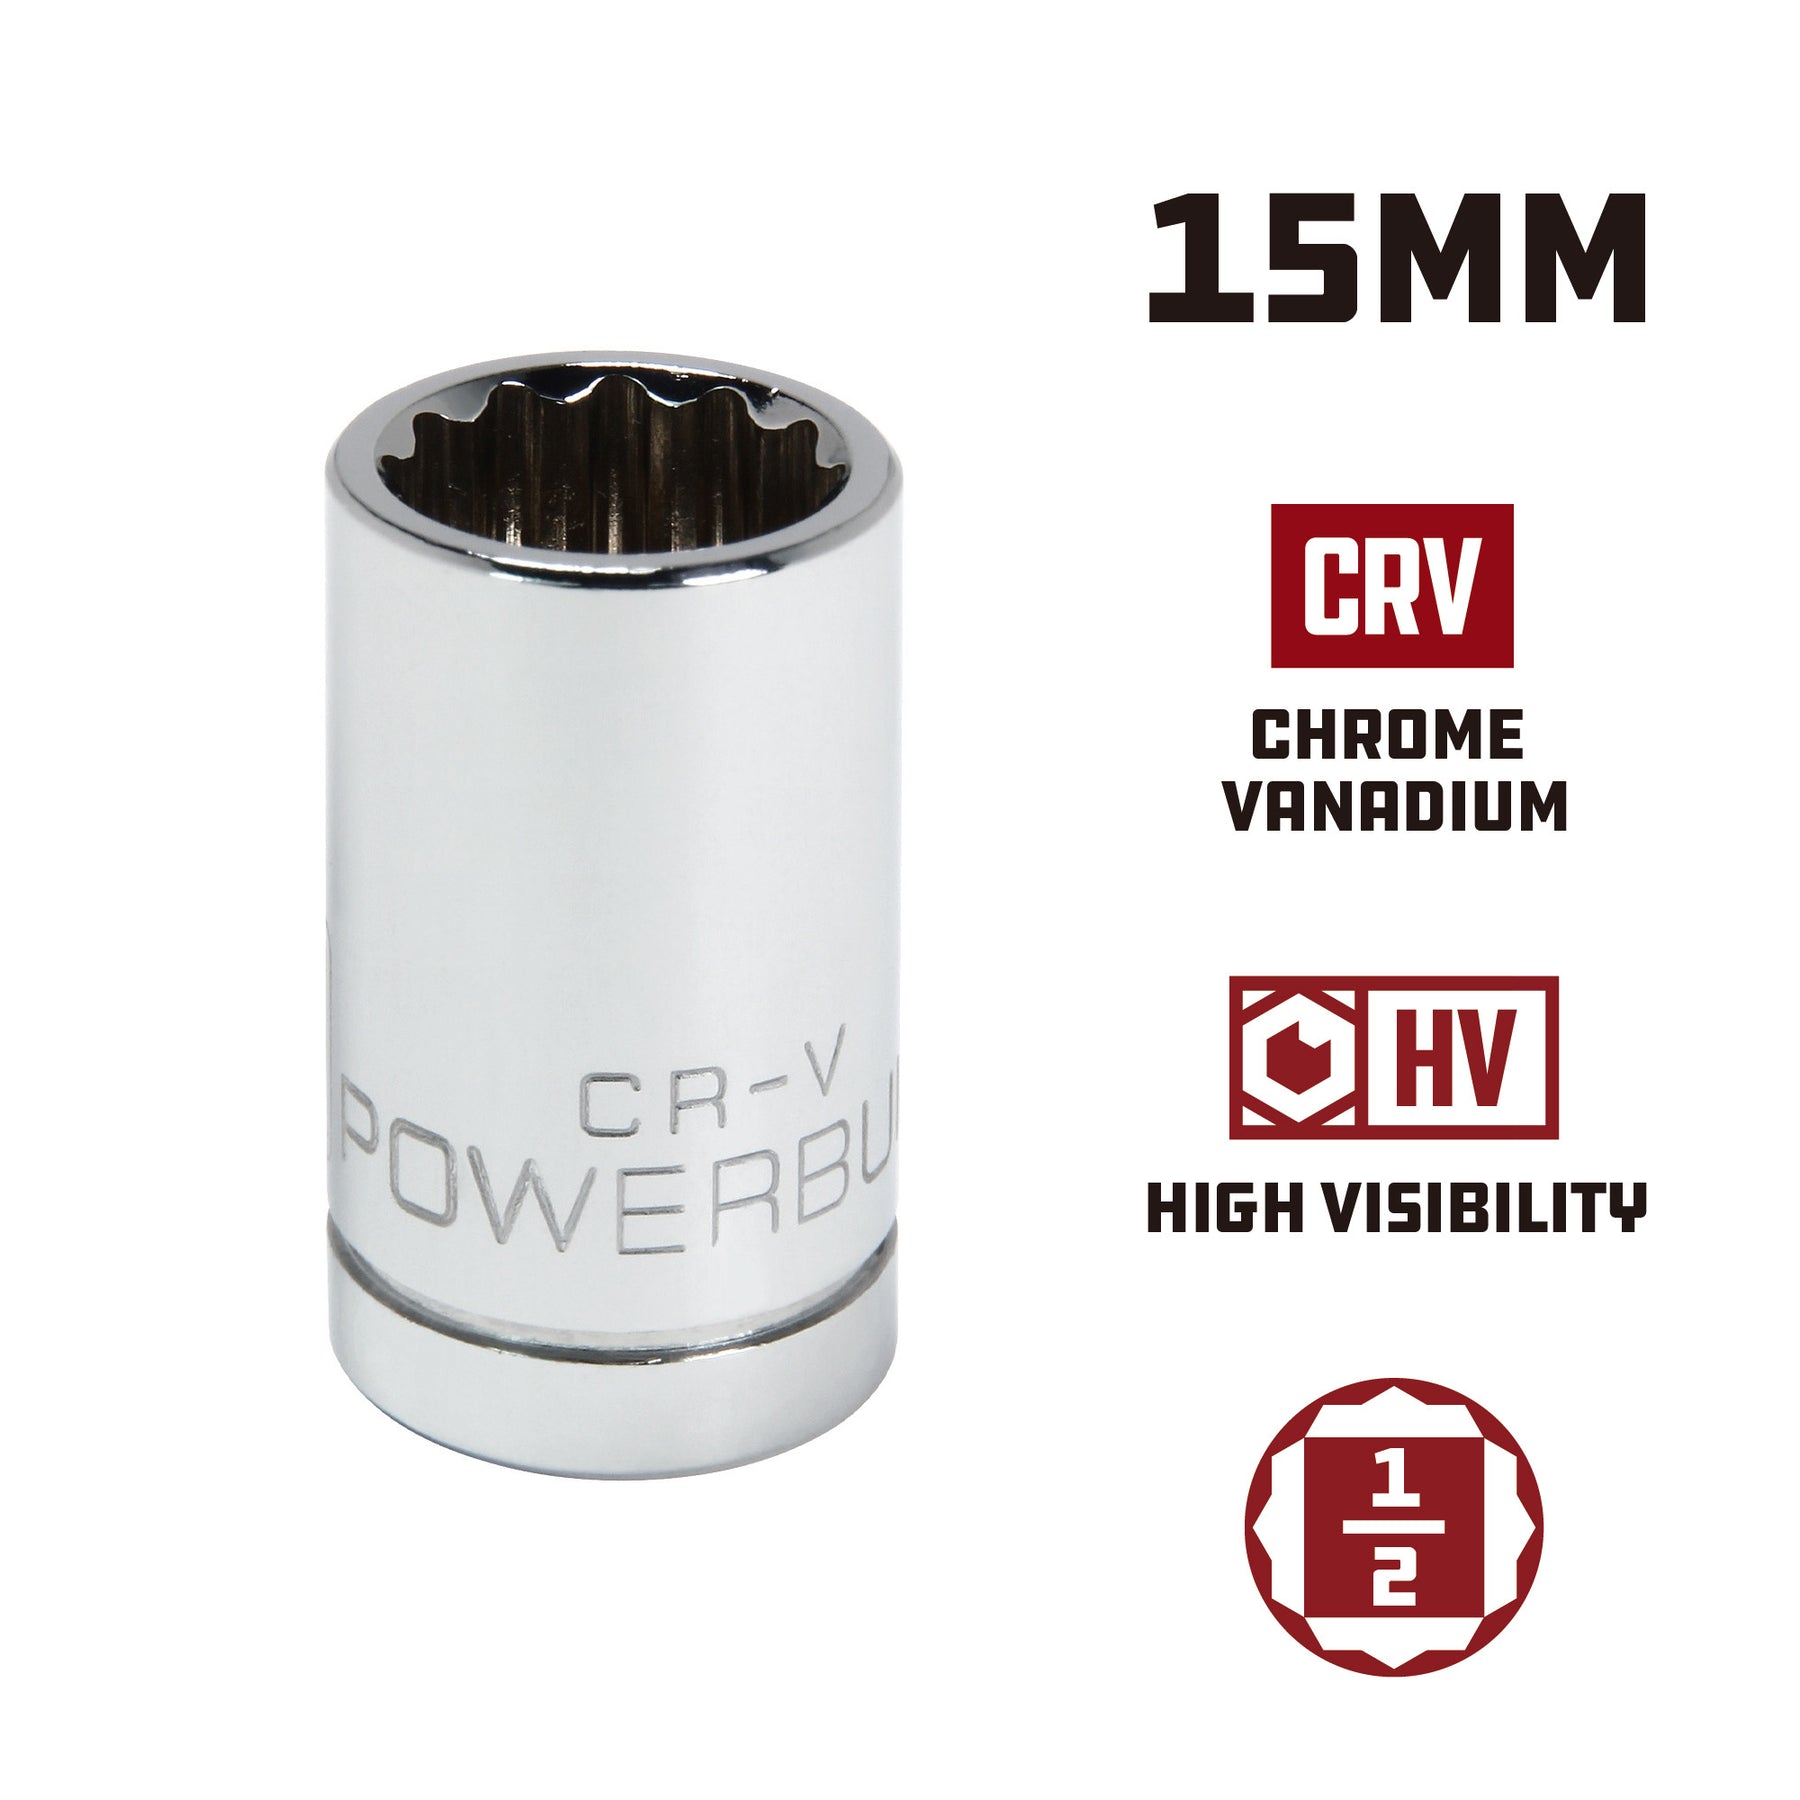 1/2 Inch Drive x 15 MM 12 Point Shallow Socket